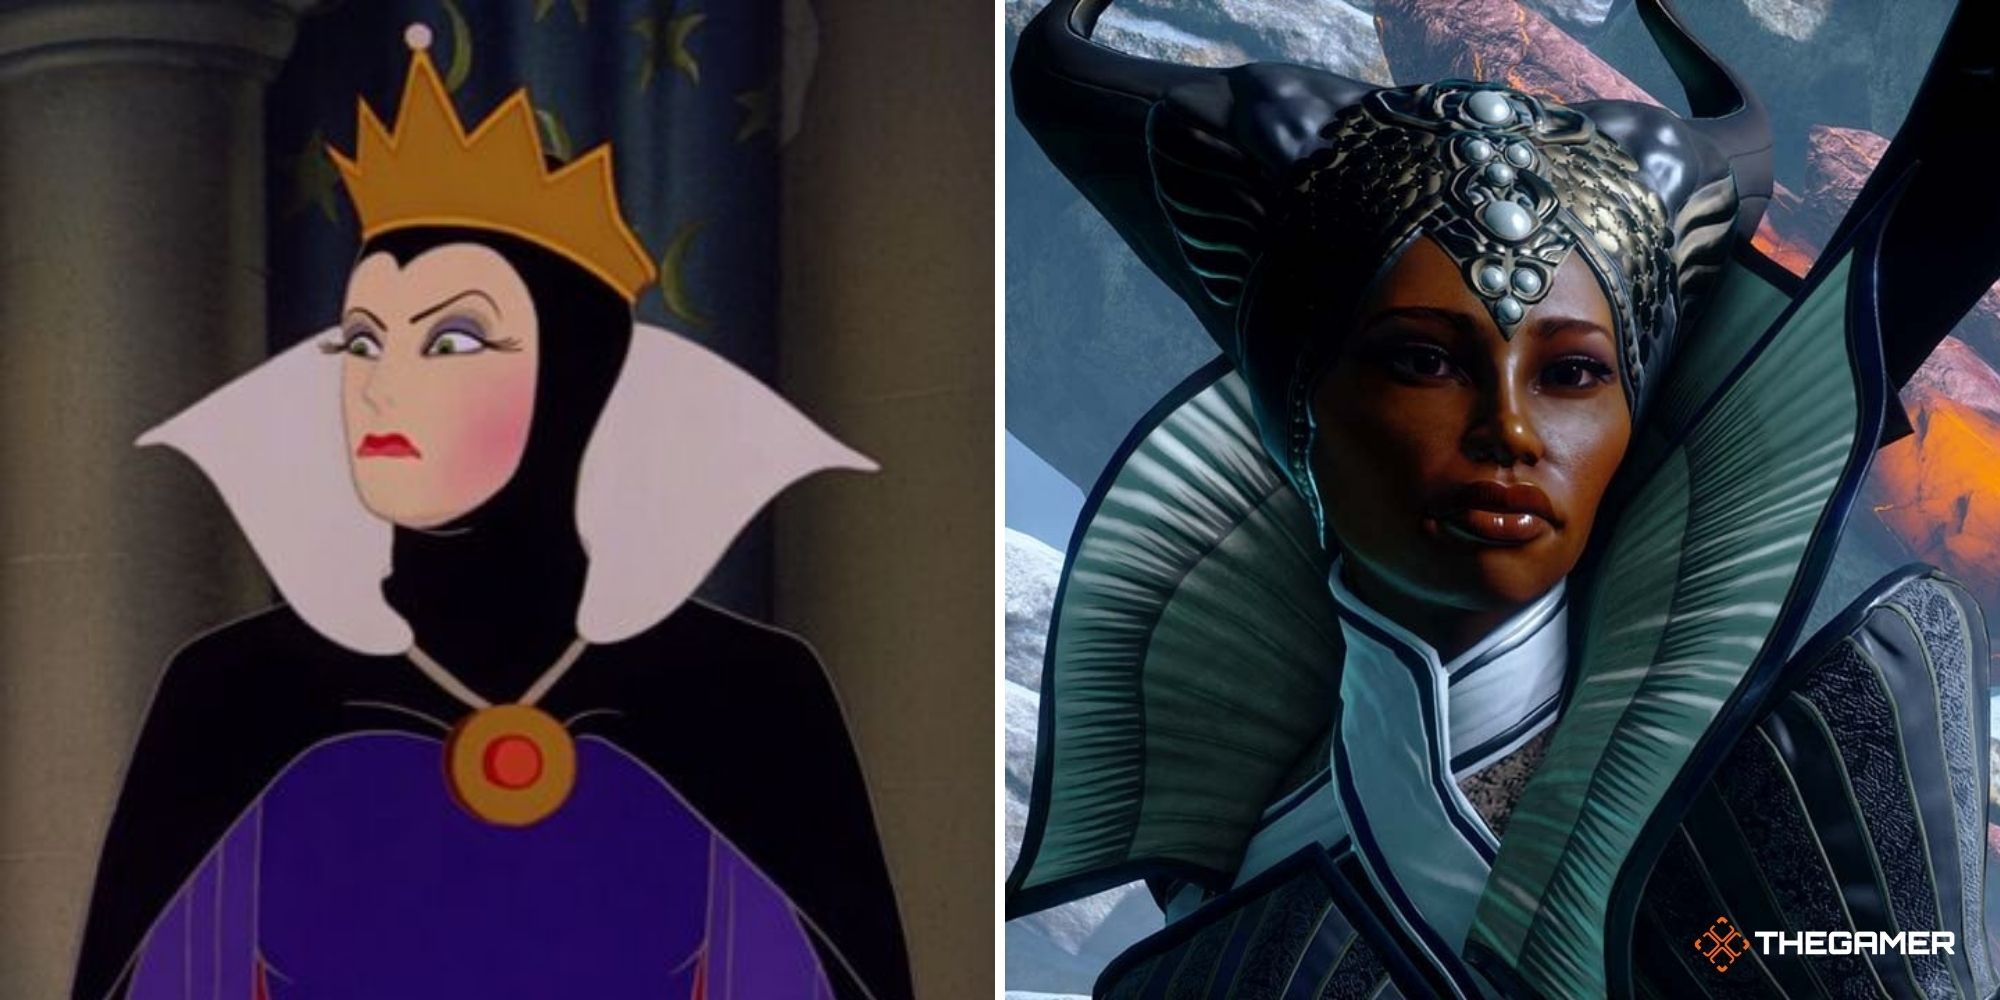 Evil Queen from Snow White Disney film (left), Vivienne from Dragon Age Inquisition (right)